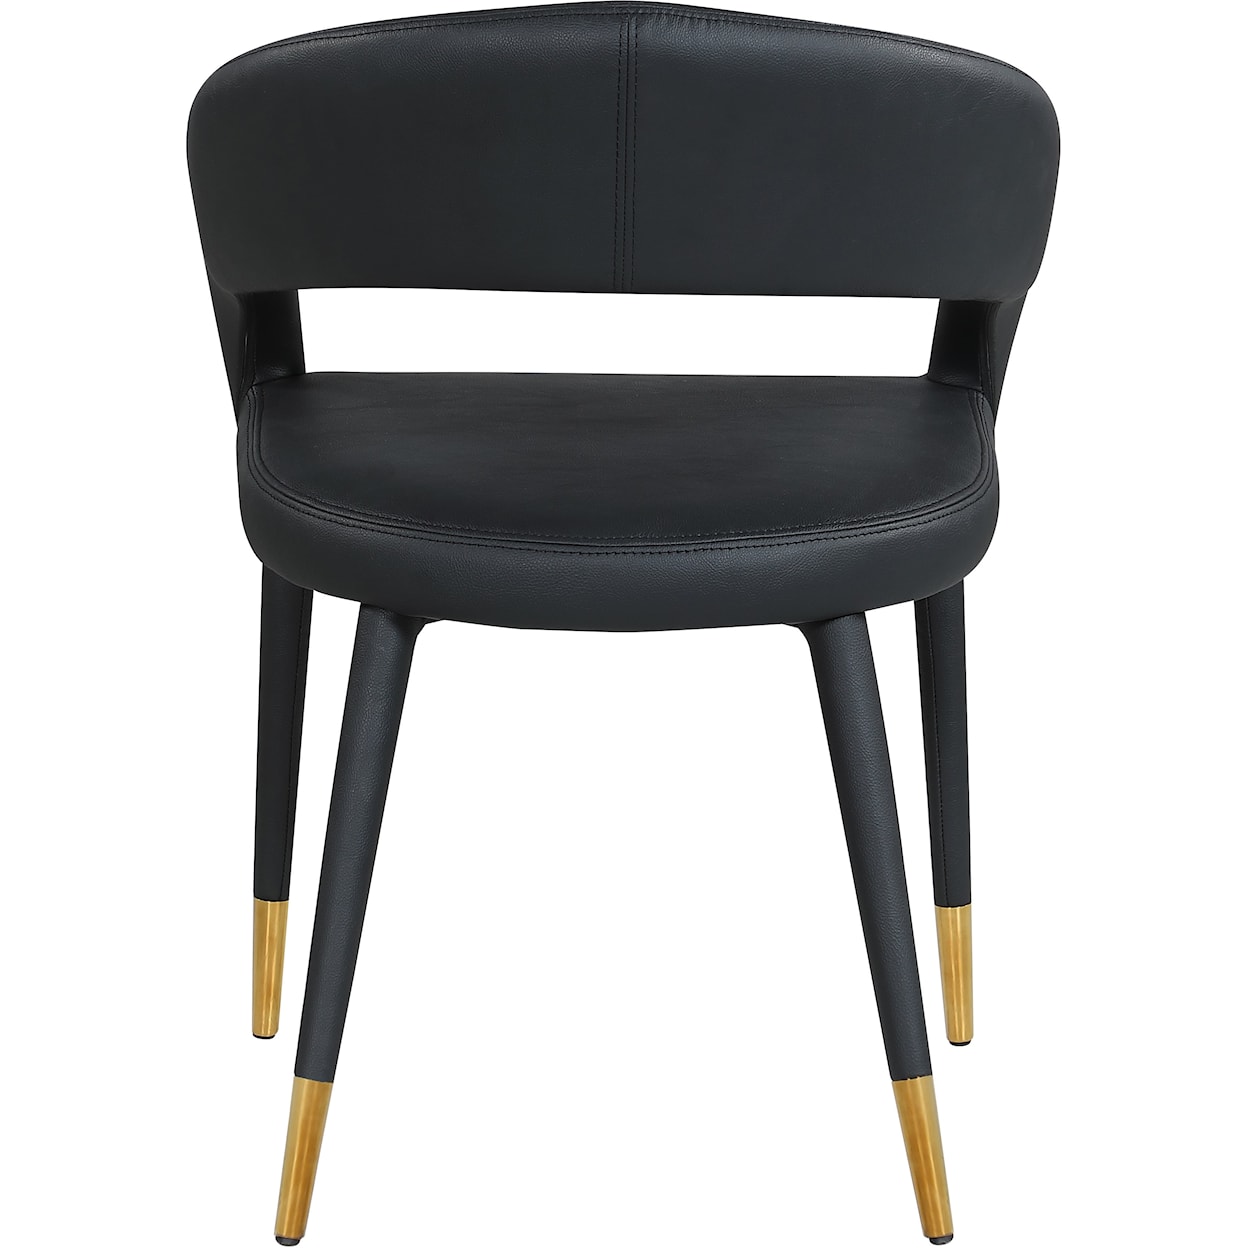 Meridian Furniture Destiny Upholstered Black Faux Leather Dining Chair